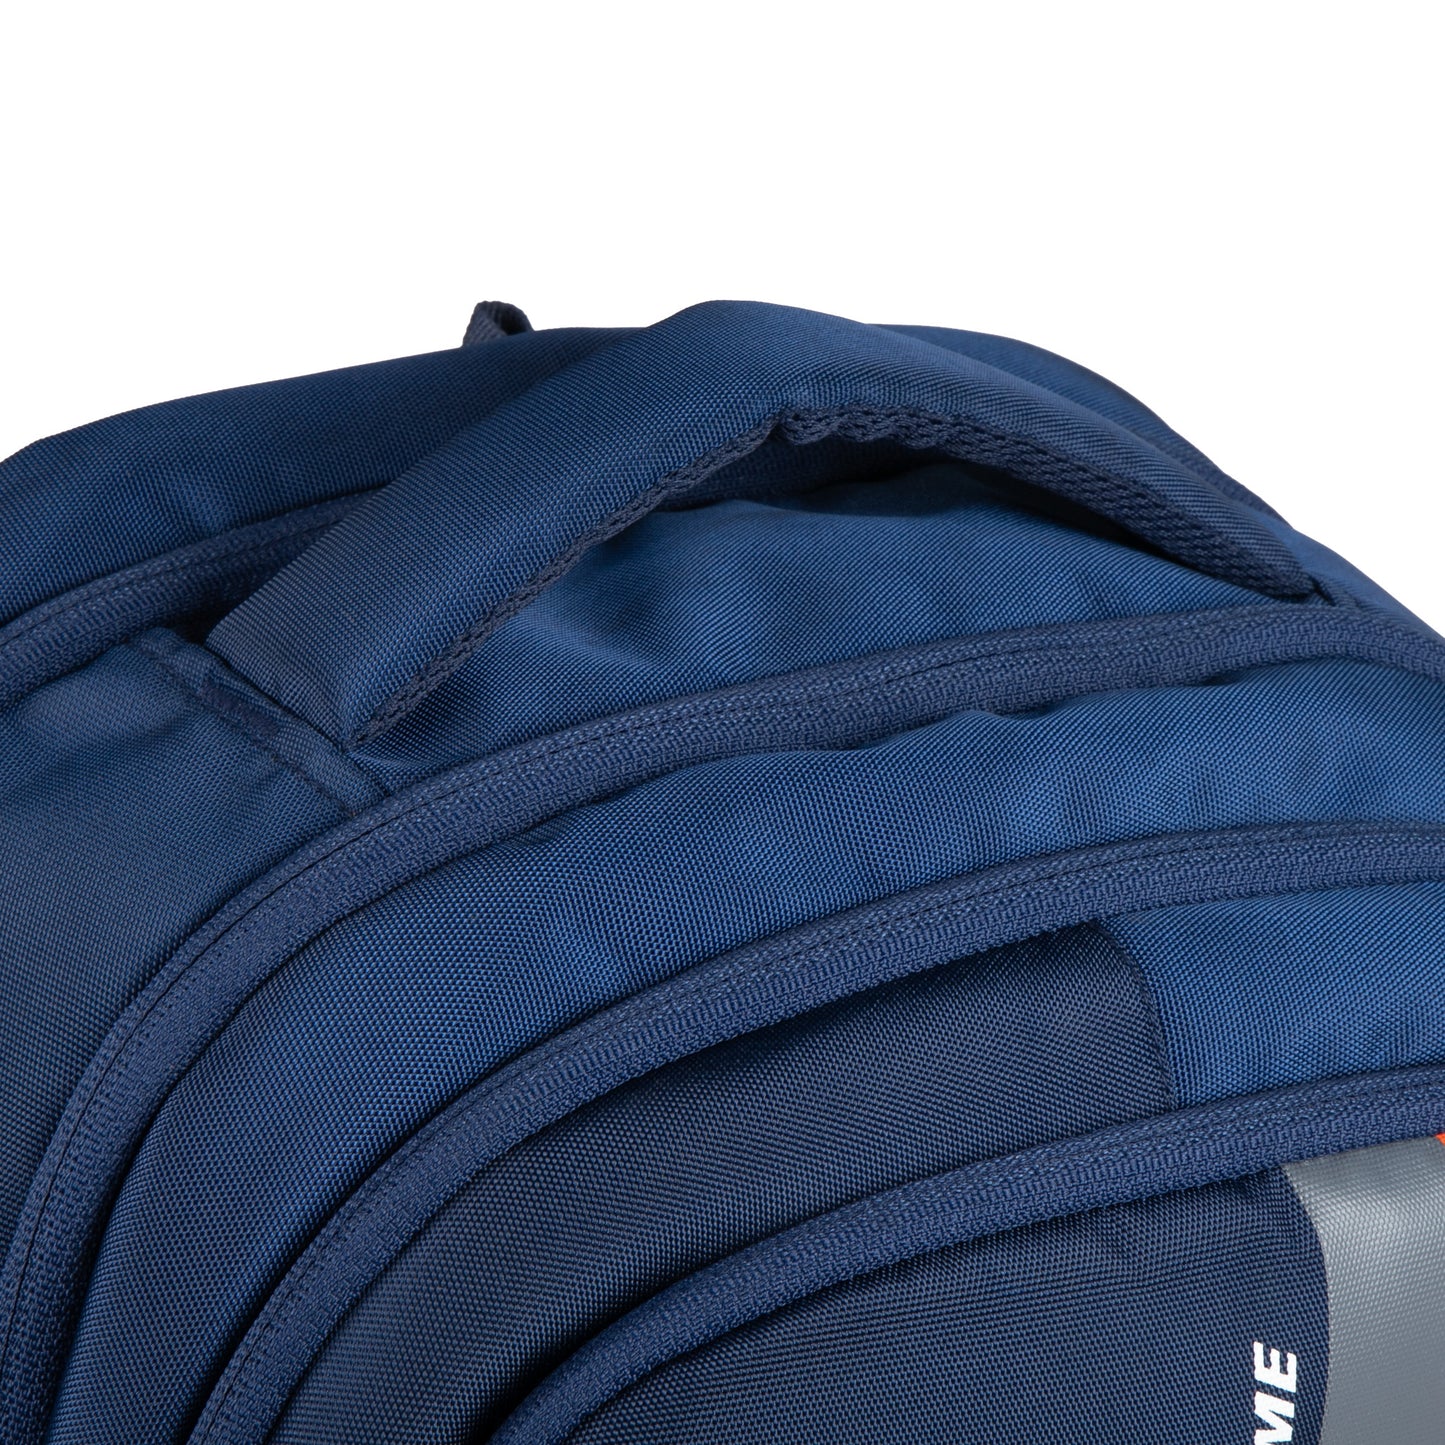 Airmate 29L Navy Backpack